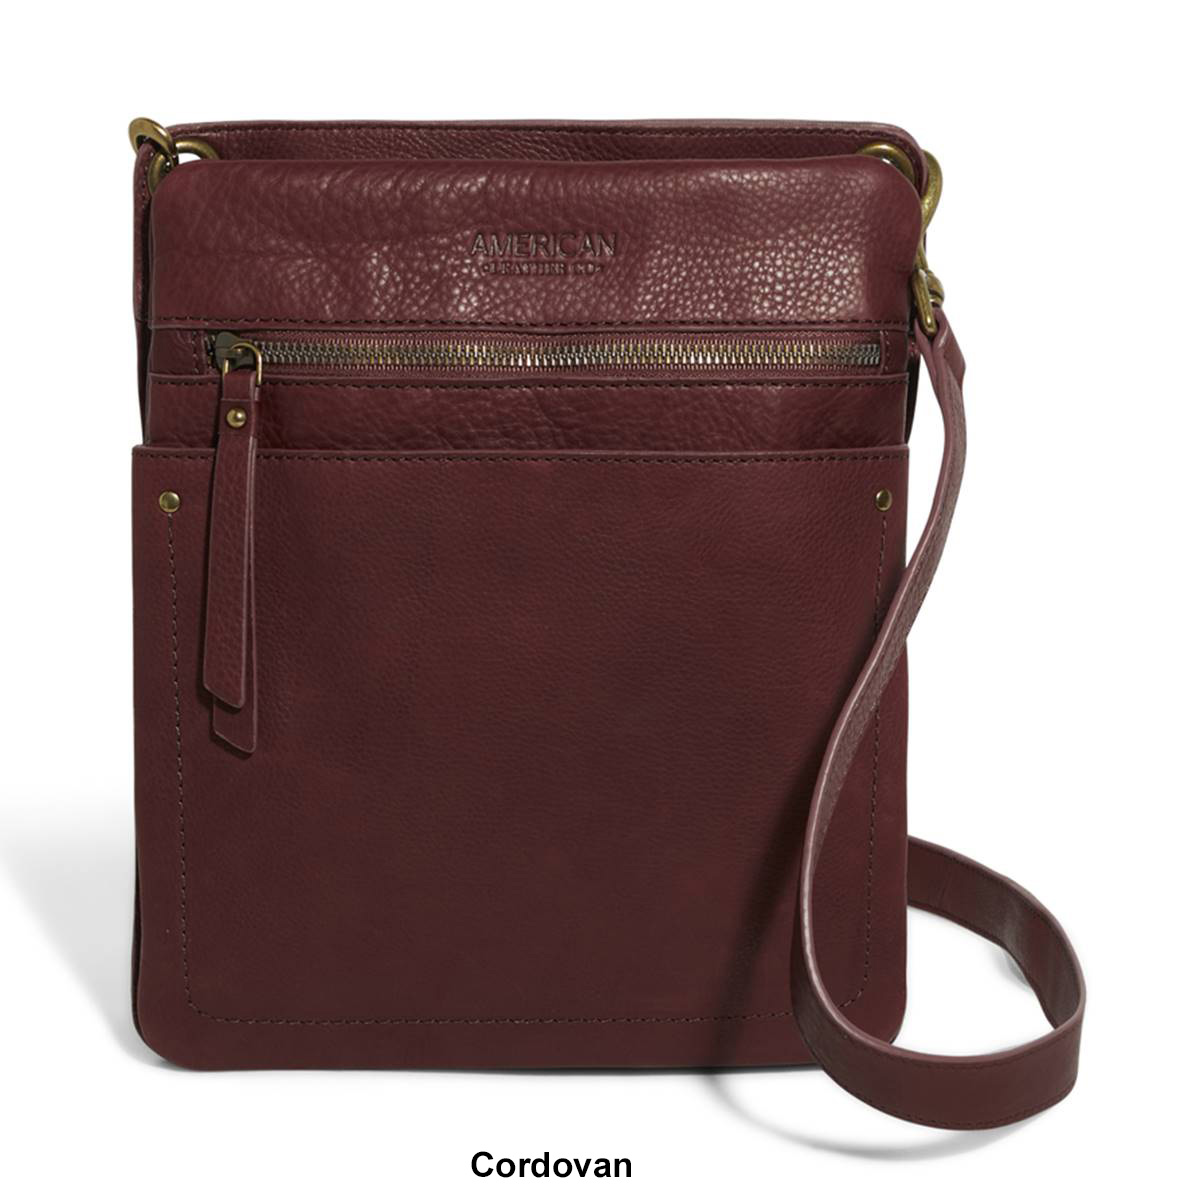 American Leather Co. Lily Multi Compartment Crossbody